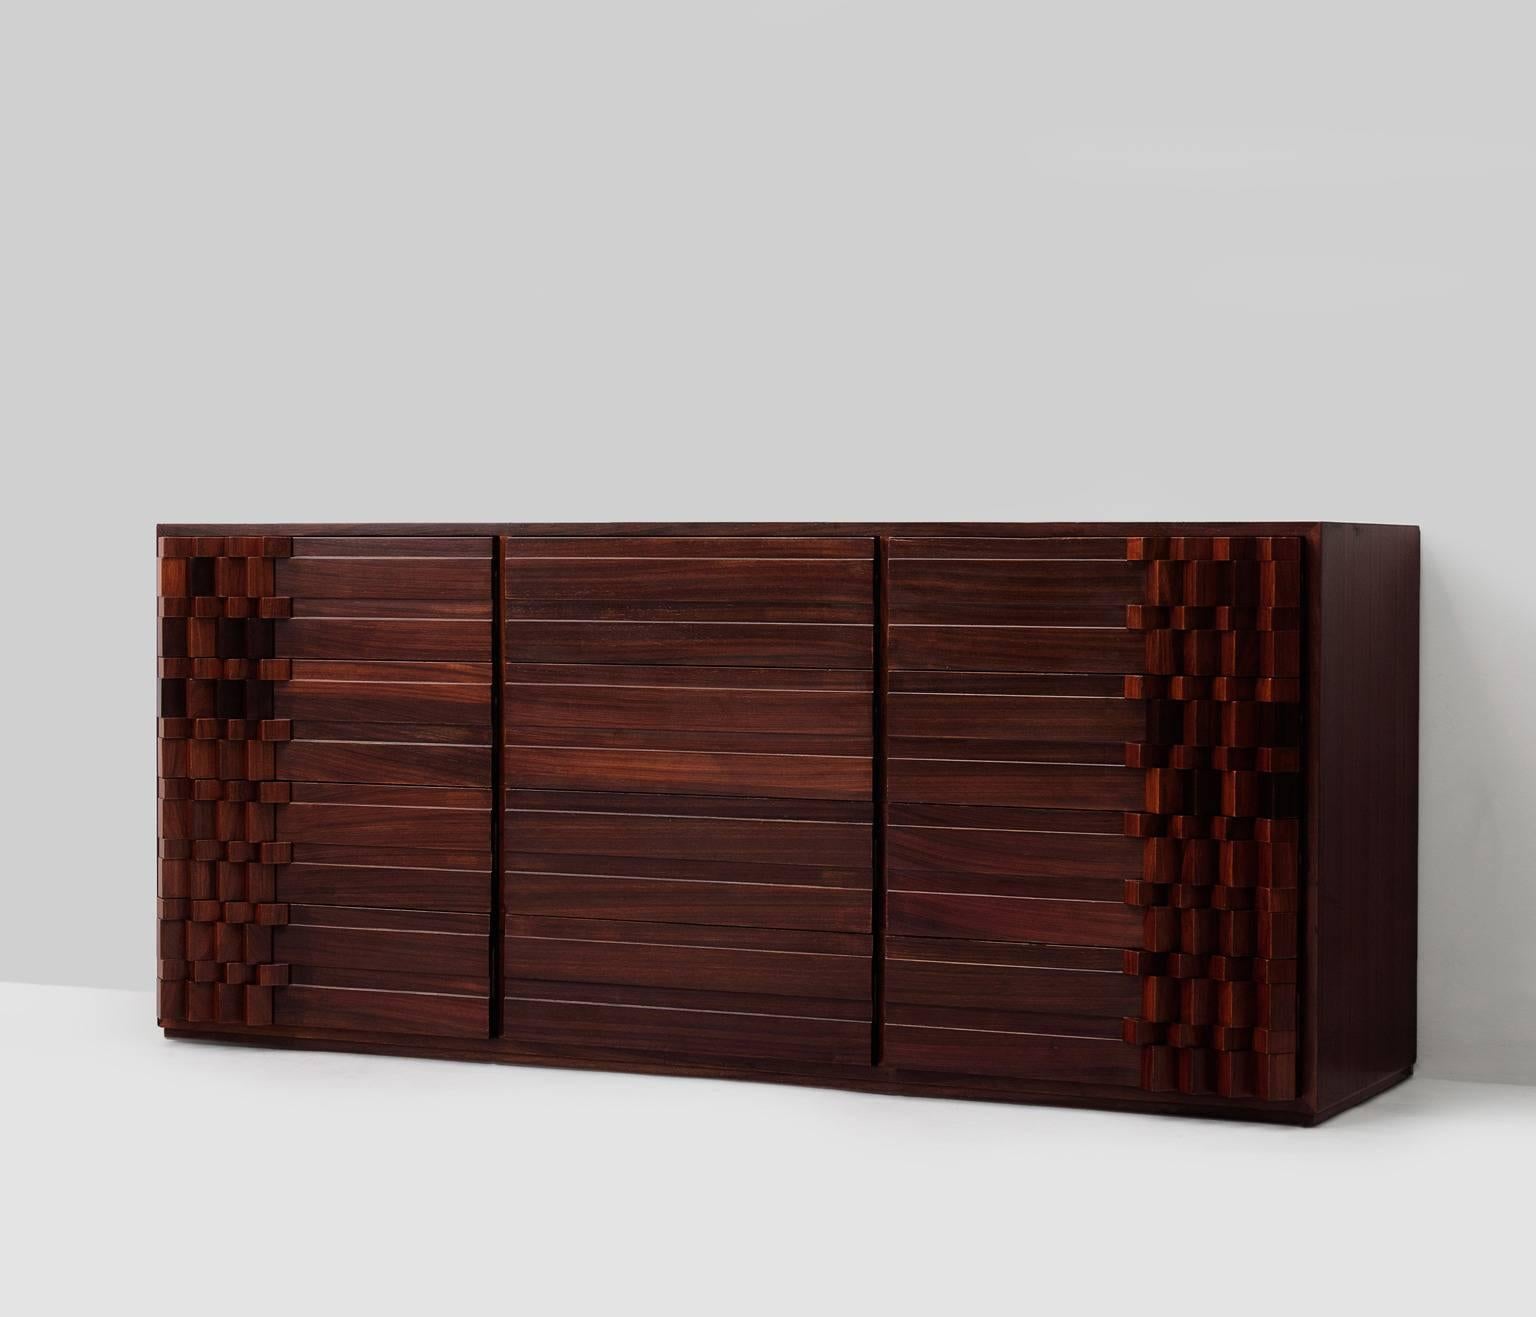 Cabinet, in rosewood, by Luciano Frigerio, Italy, 1970s.

This rosewood dresser is very smart designed and hold plenty of storage facility. The expressive fronts made of solid rosewood slats gives this credenza its unique appearance. The rosewood